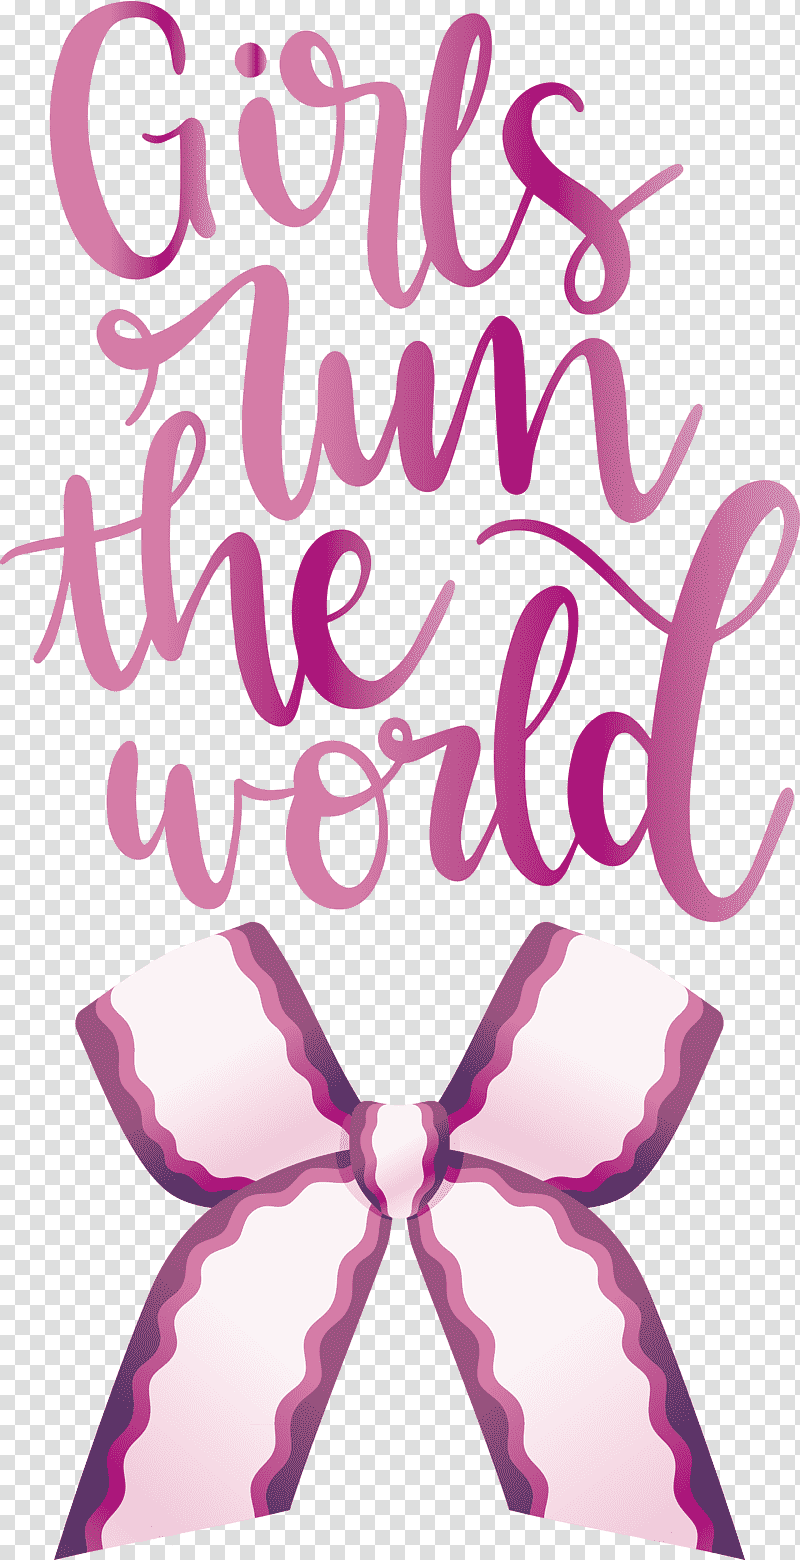 Girls Run The World Girl Fashion, Ribbon, Shoelace Knot, Black And White
, Drawing transparent background PNG clipart